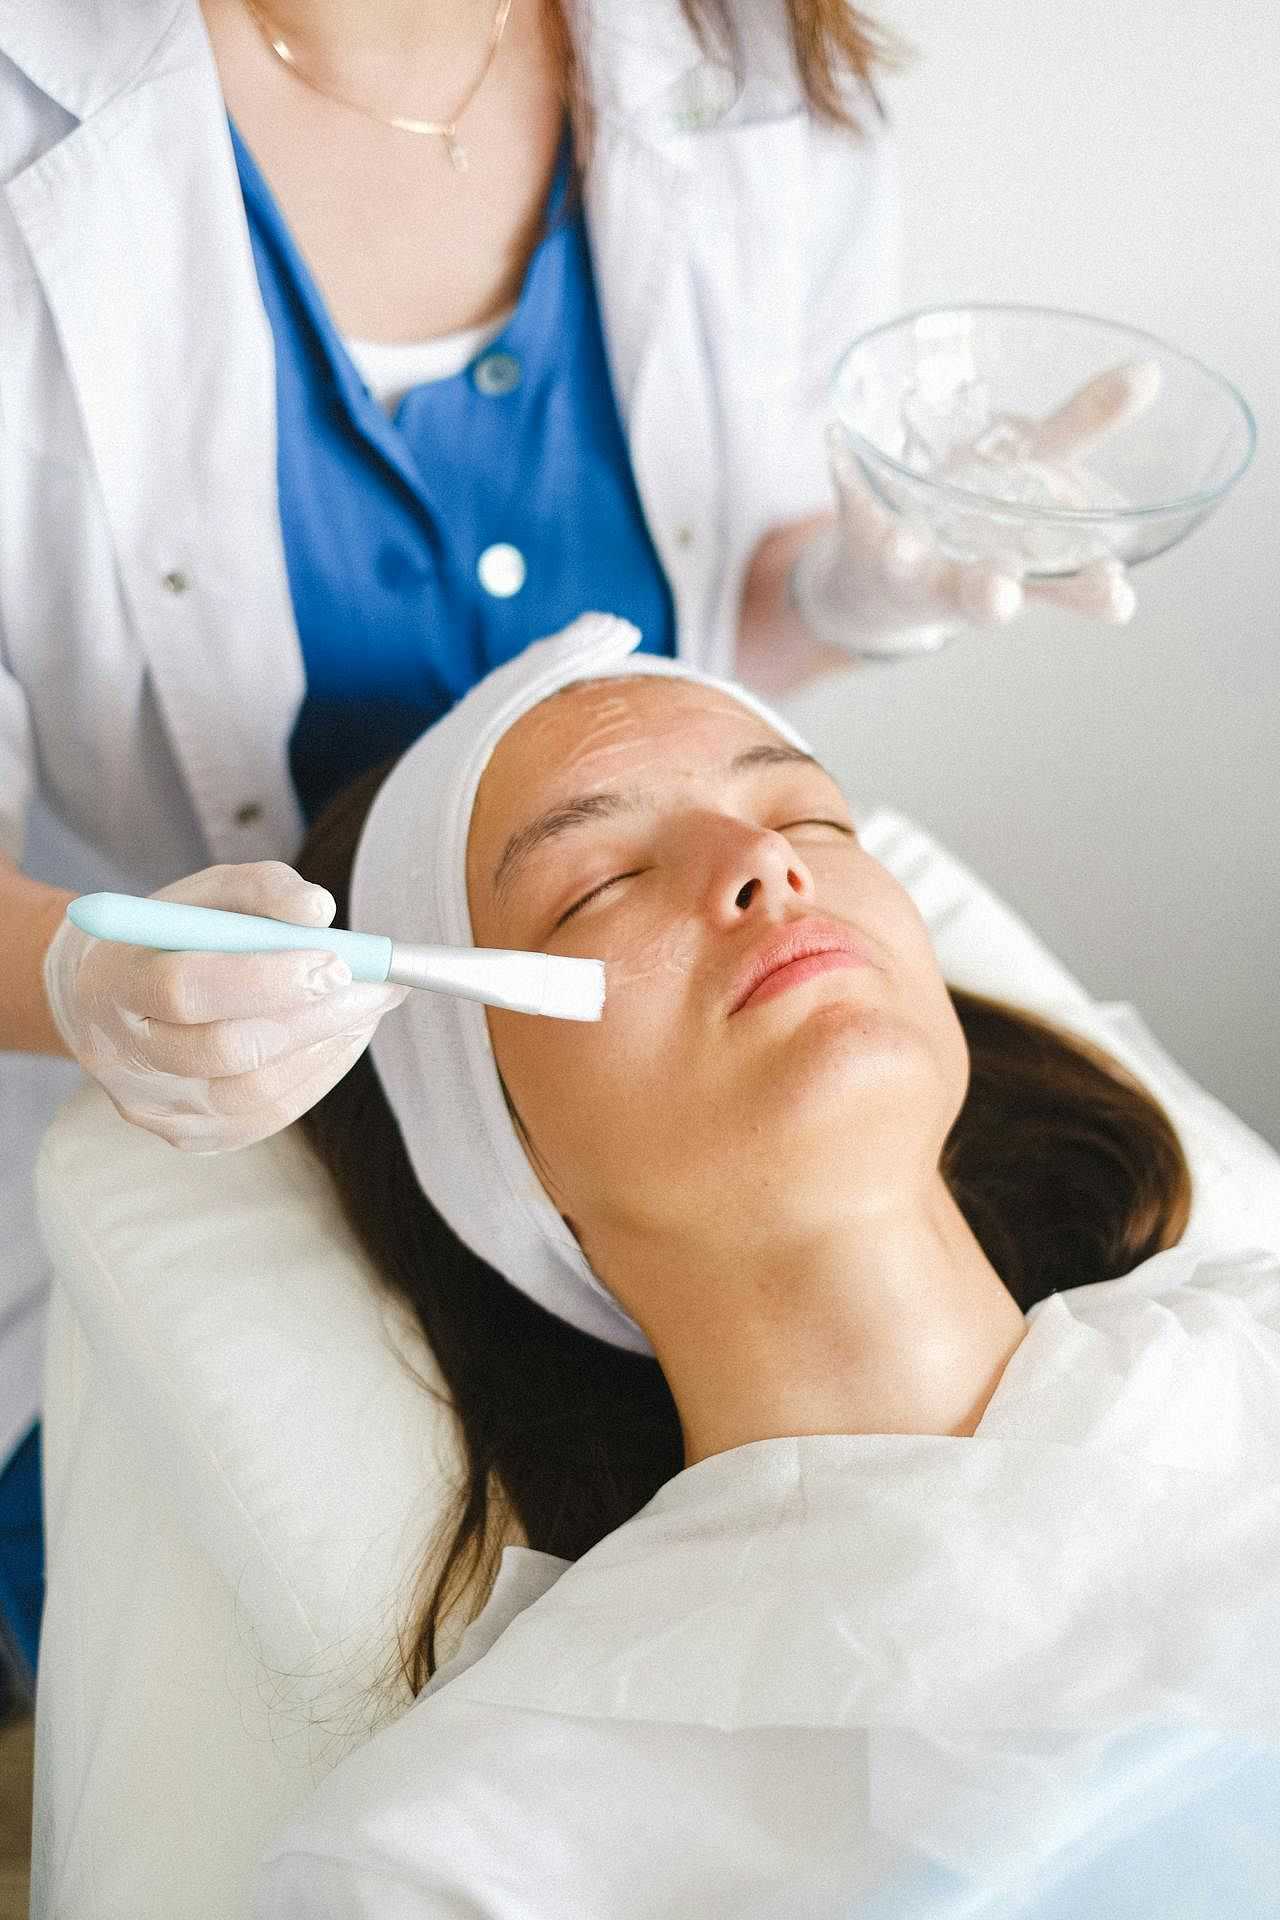 Woman receiving a facial treatment with a brush at a spa.